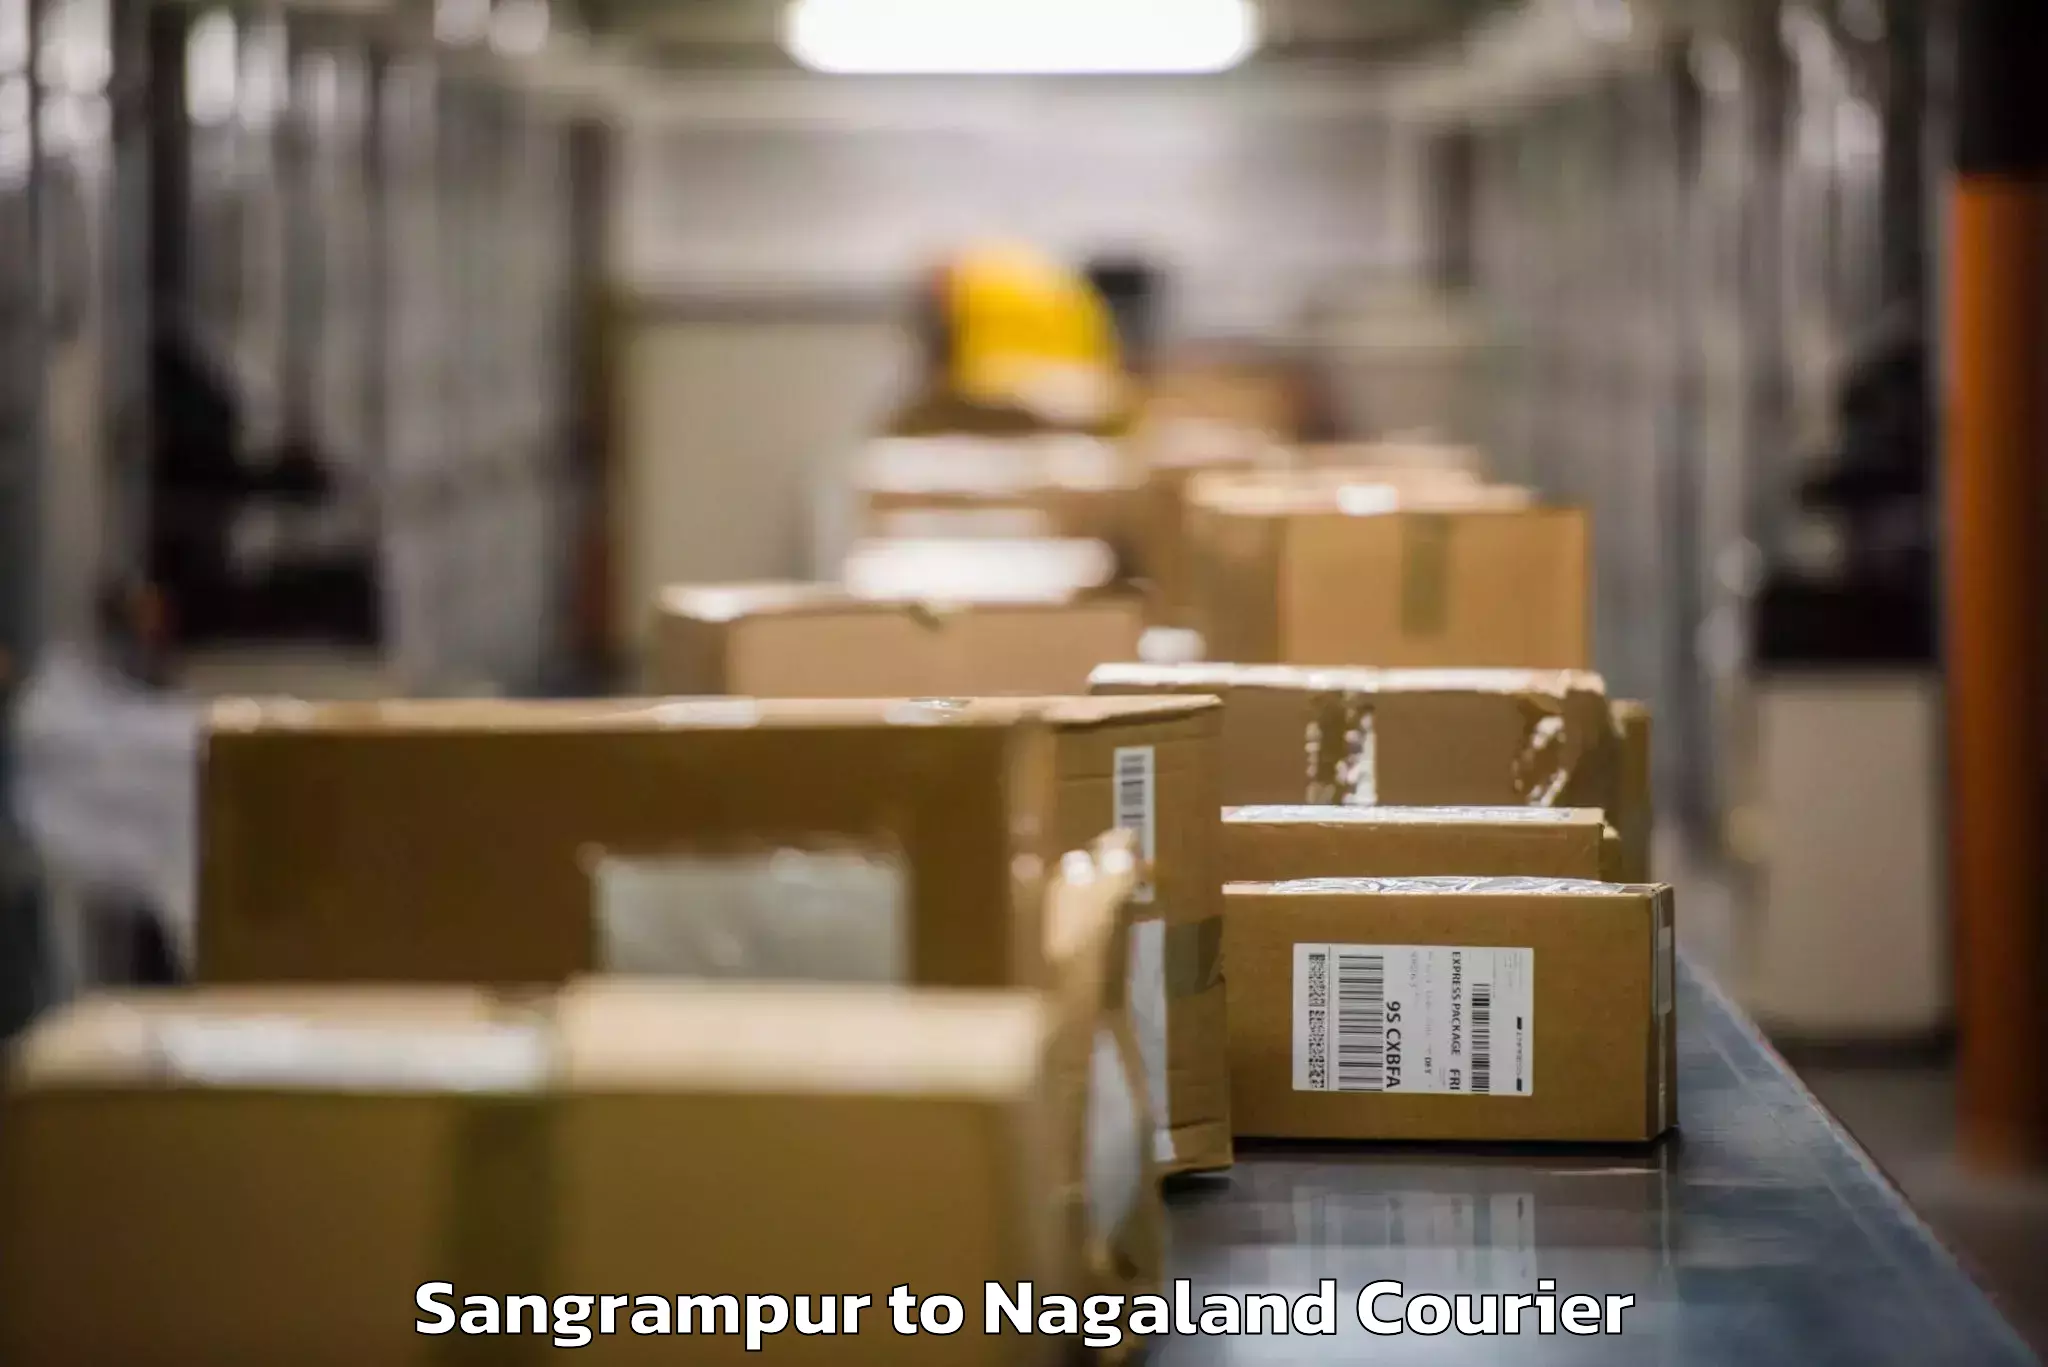 Personal effects shipping Sangrampur to Dimapur